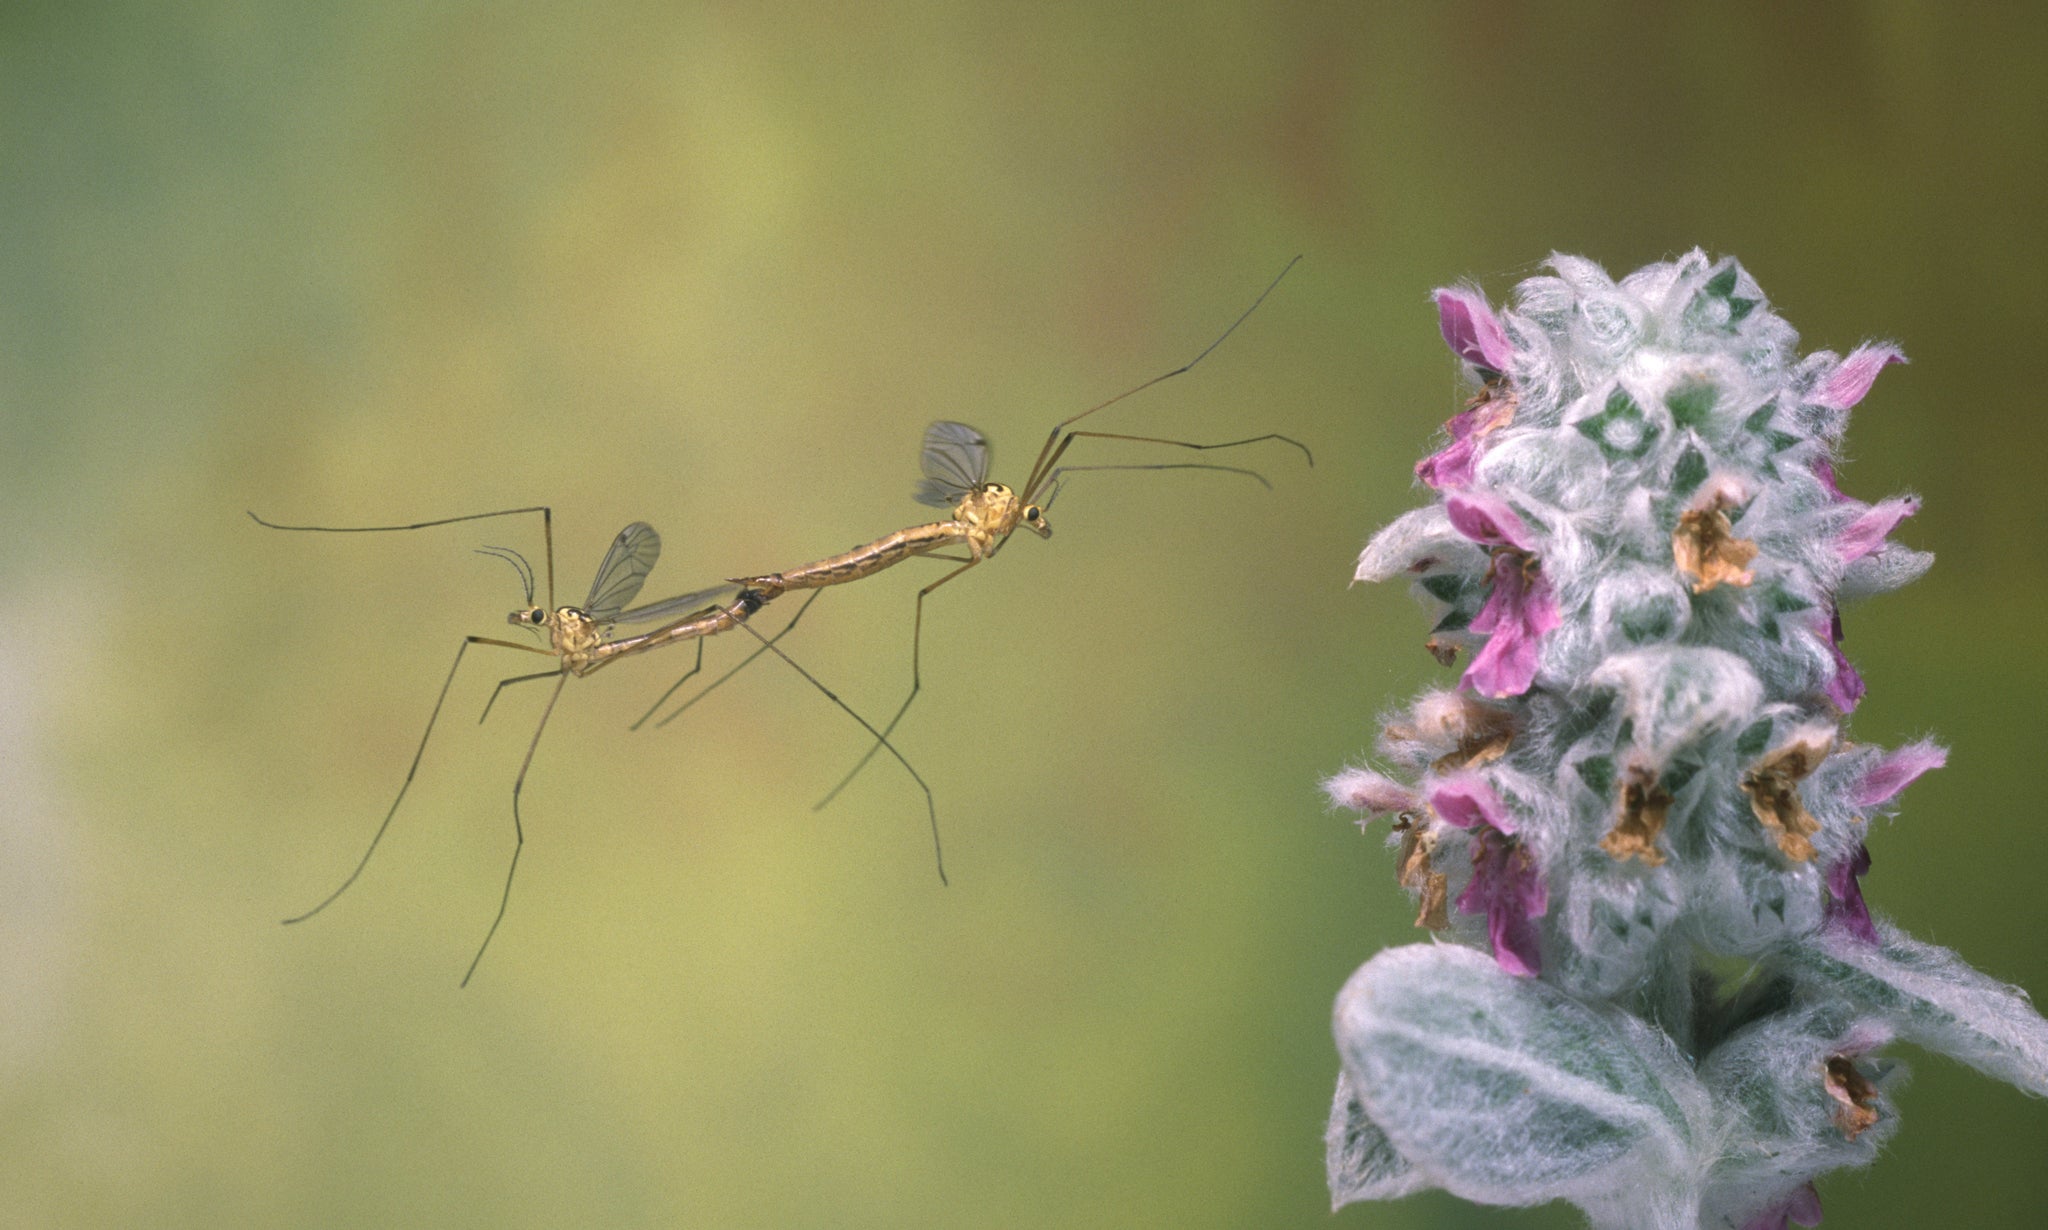 Homes in the UK can expect to see a swell in the numbers of Daddy Longlegs